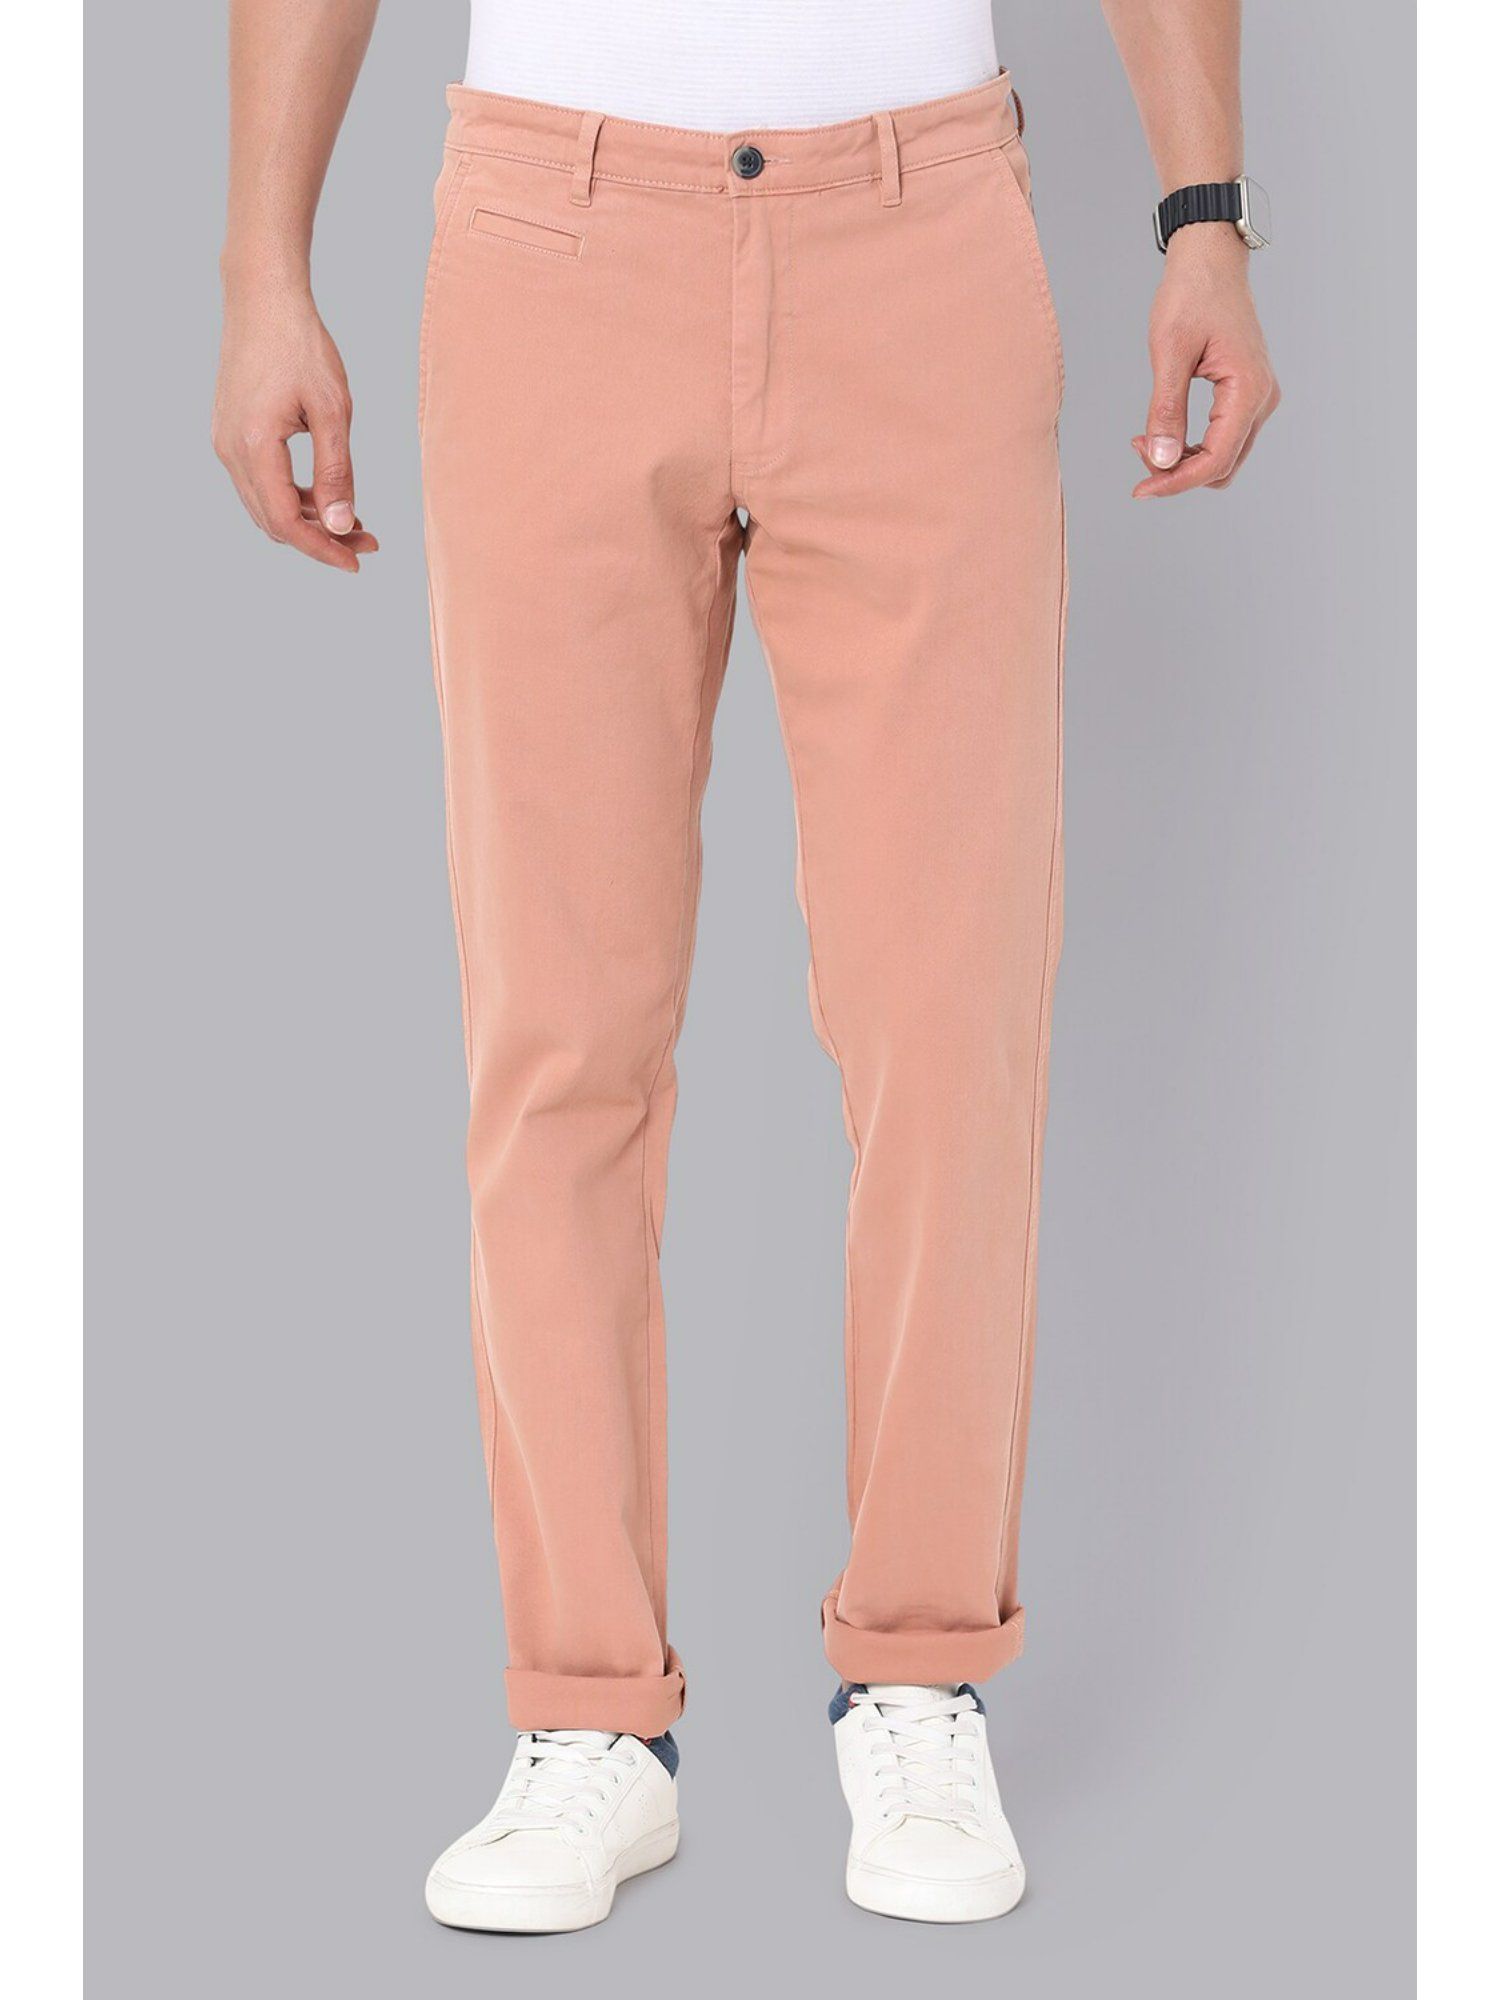 Country Club Prep The Charlottesville Orange Pant